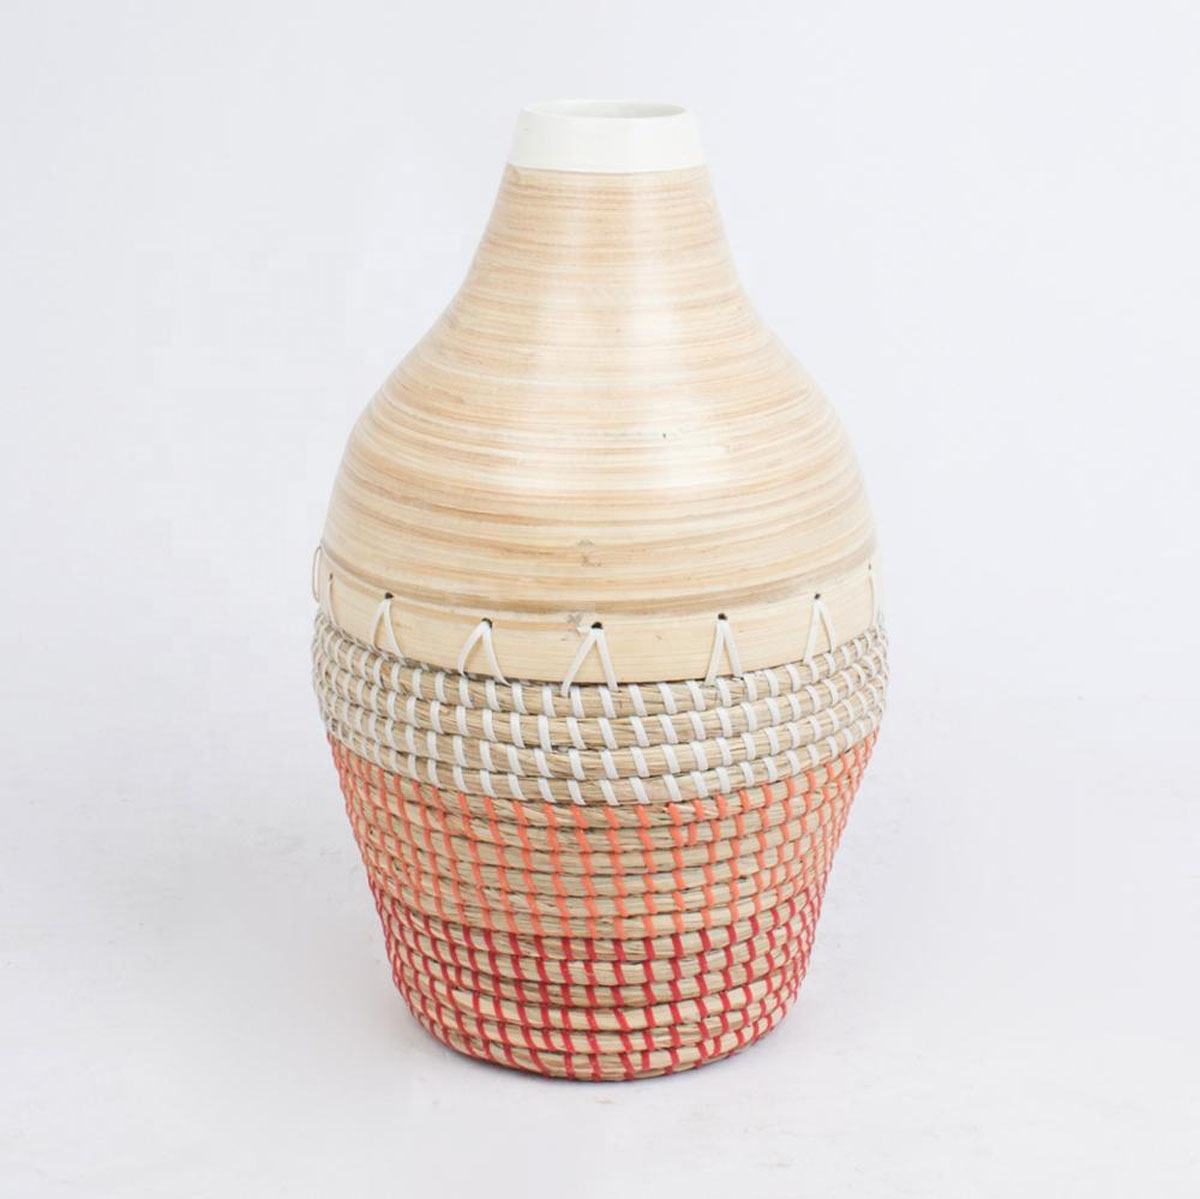 Eco-friendly, Round Natural Vases made of Bamboo